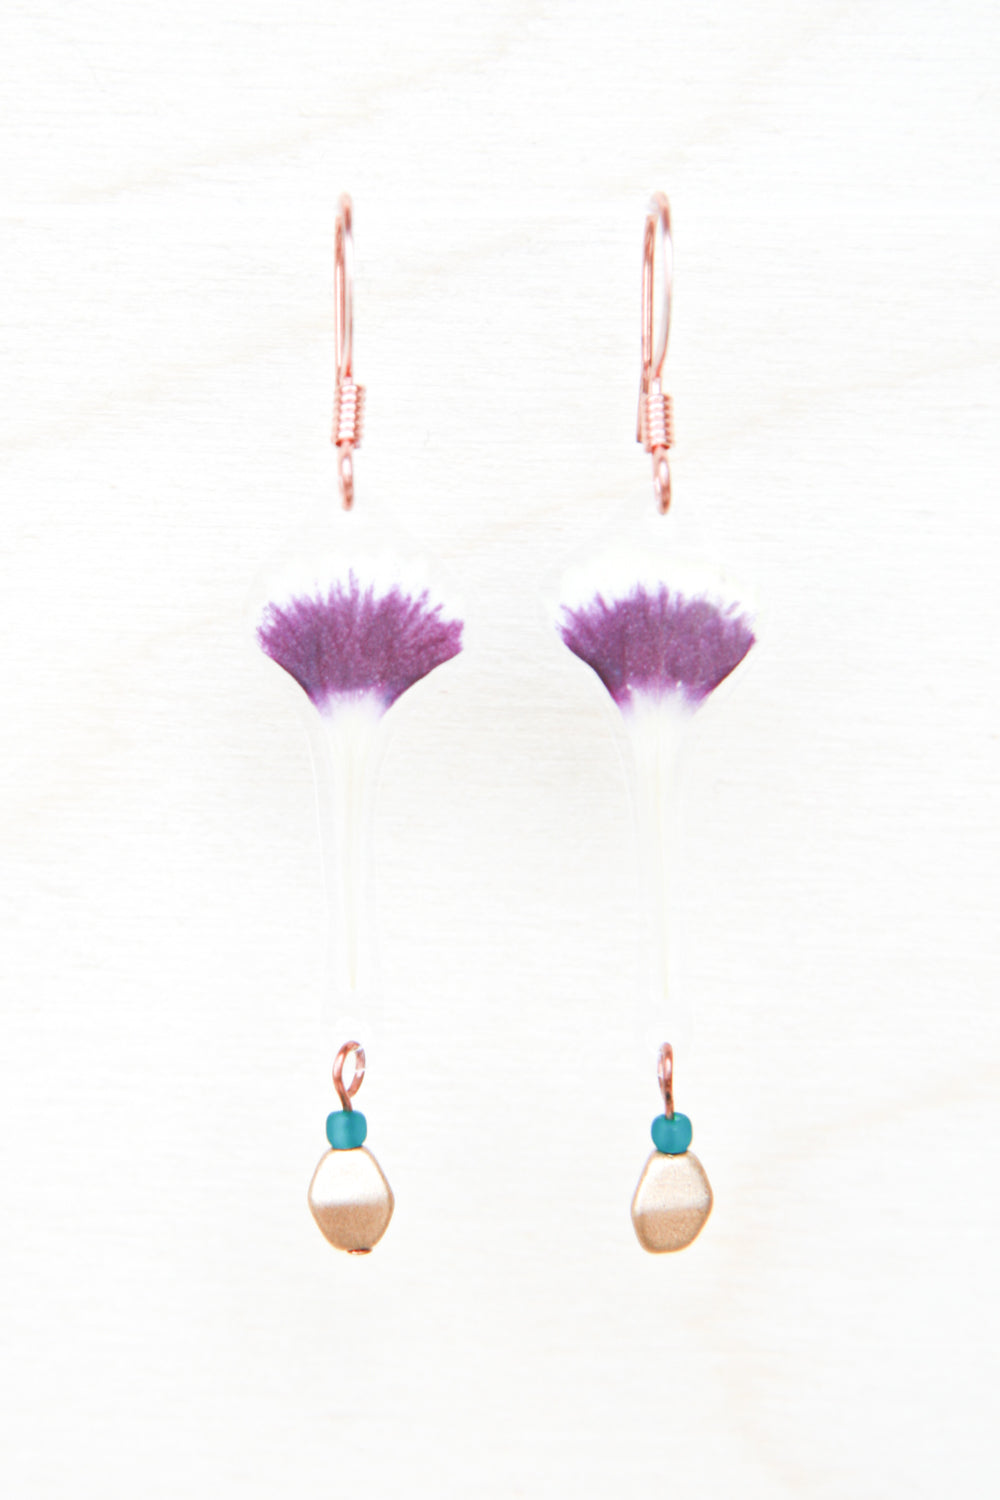 Sweet William Pressed Petal Earrings with Teal & Flax Glass Beads